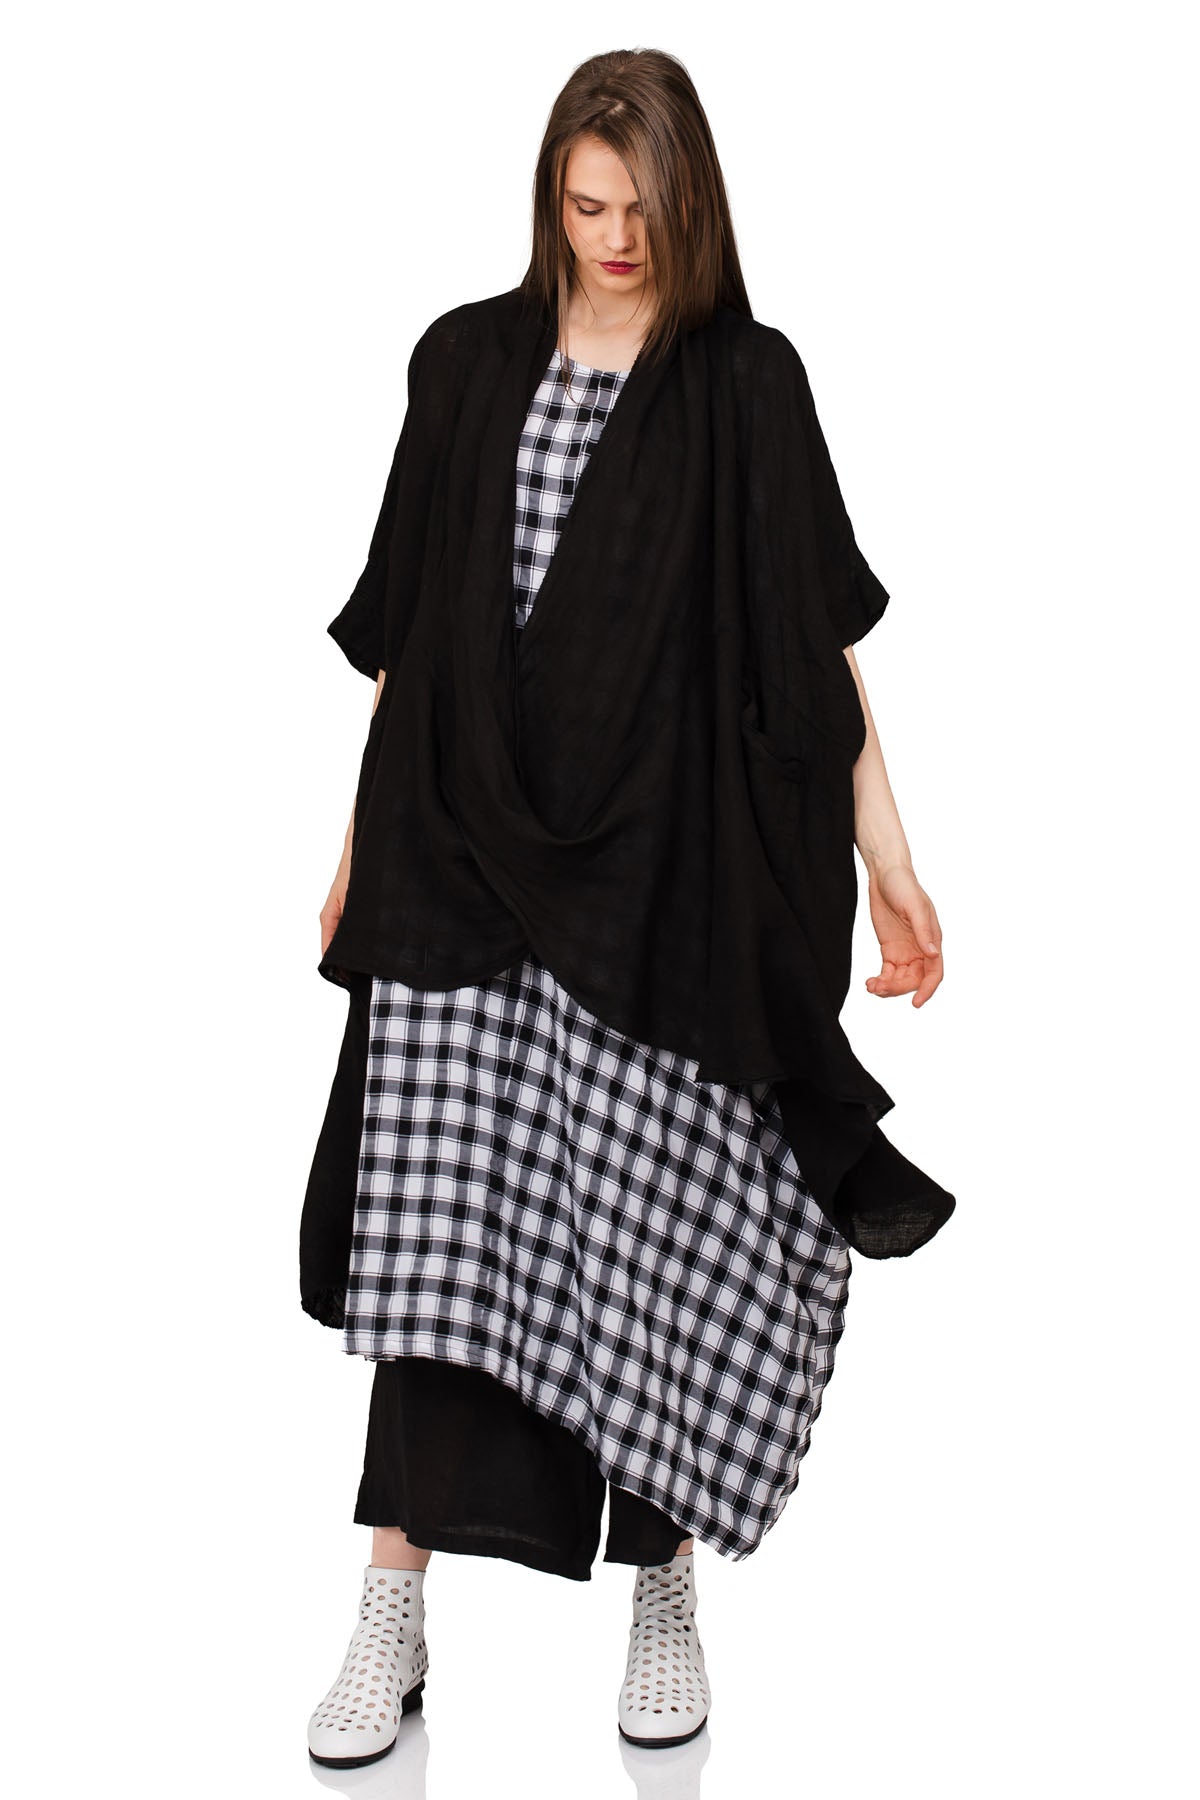 Chic & Simple Kali Dress - Black and White Check